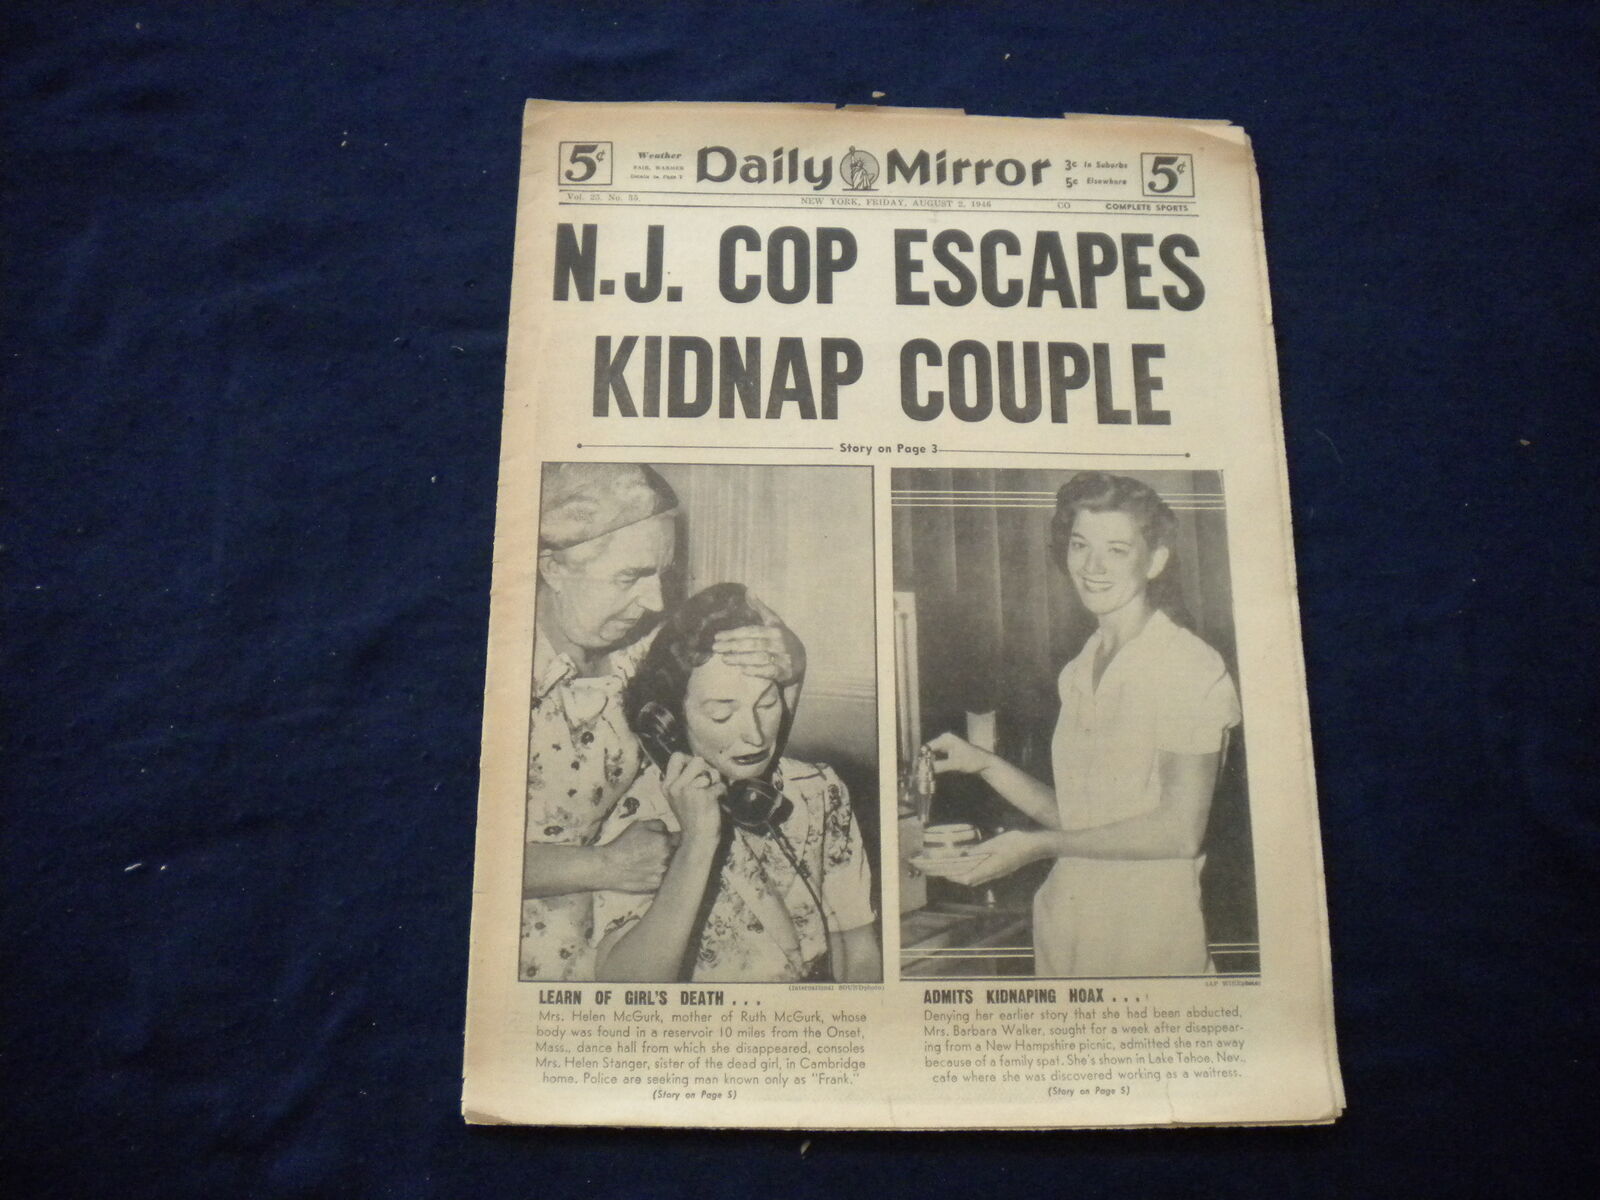 1946 AUG 2 NEW YORK DAILY MIRROR NEWSPAPER - N.J. COP ESCAPES KIDNAP - NP 5995